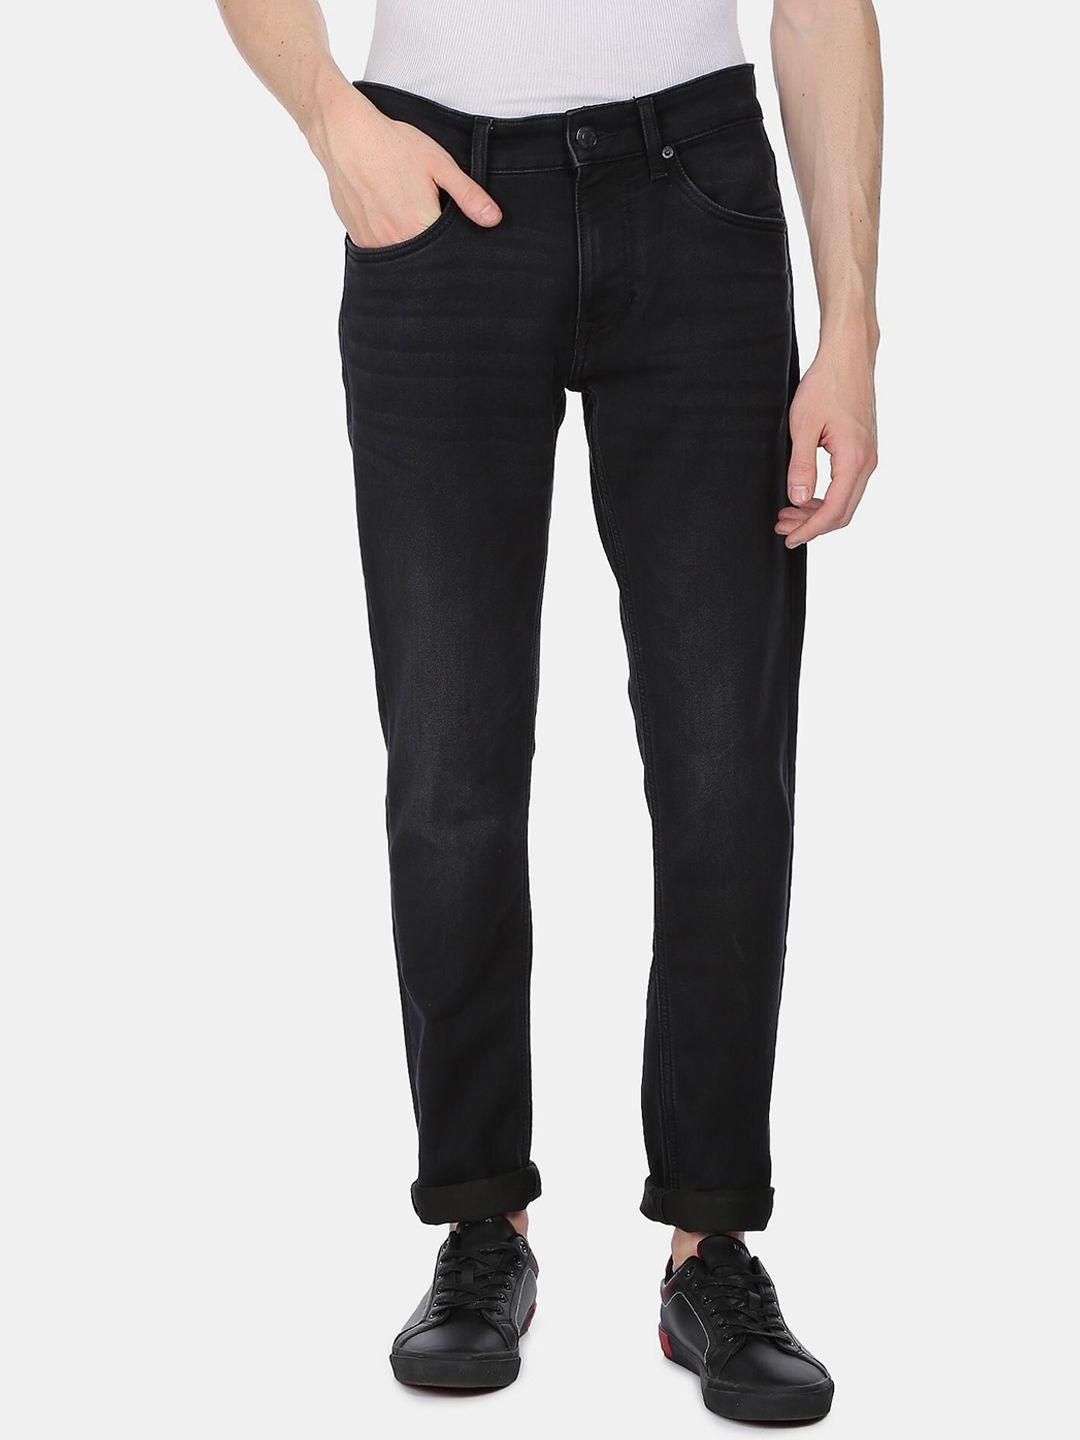 u.s. polo assn. men tapered fit jeans